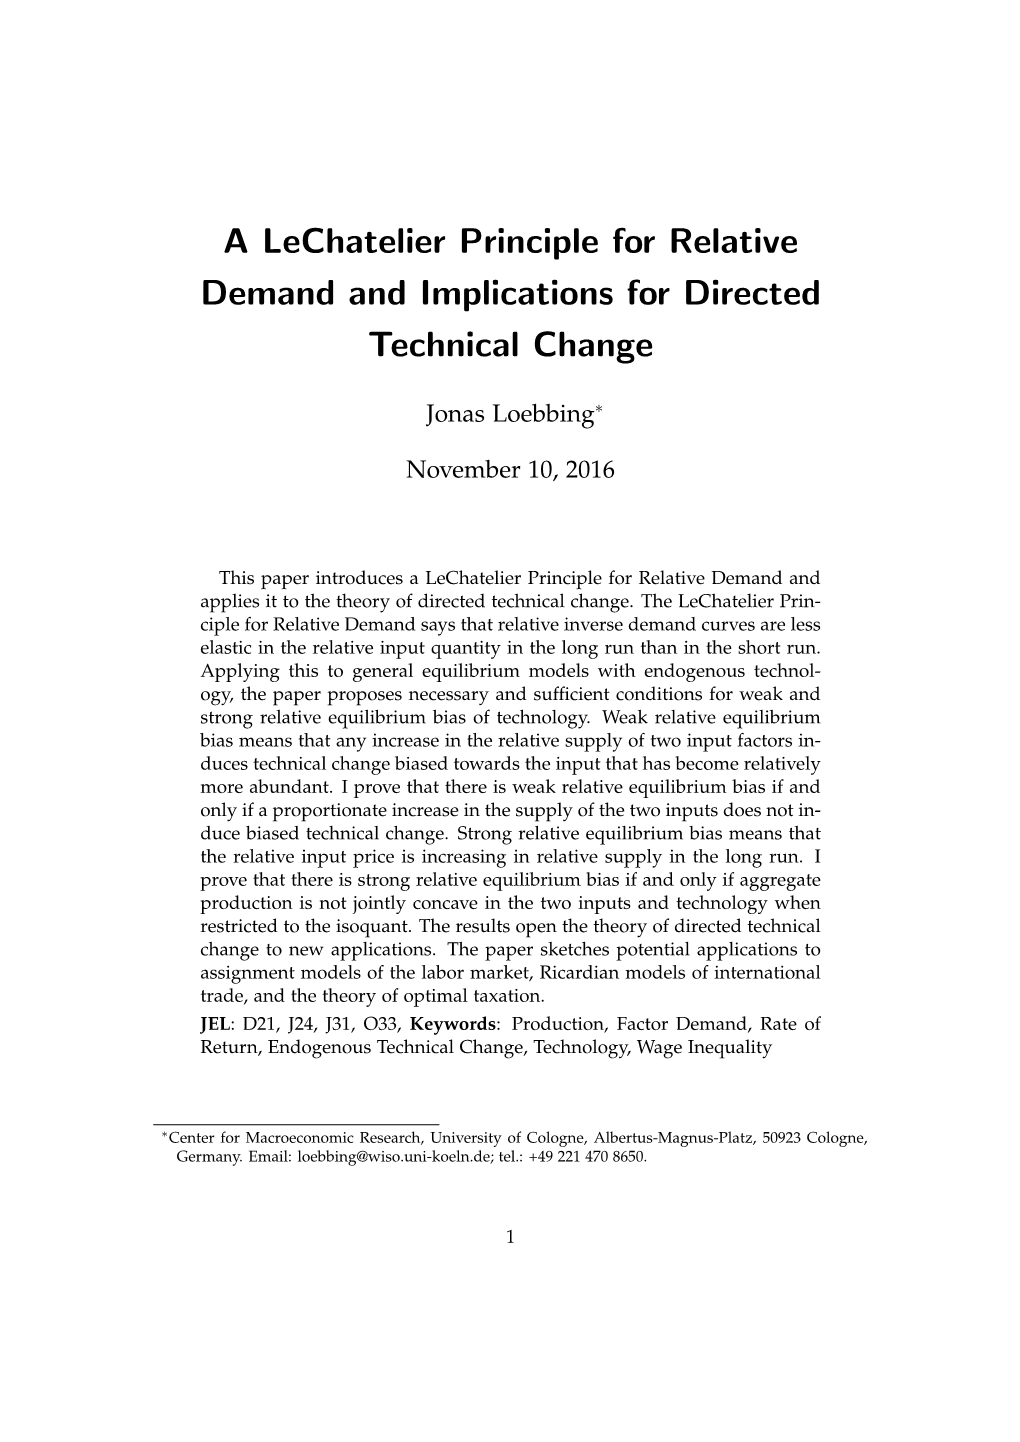 A Lechatelier Principle for Relative Demand and Implications for Directed Technical Change